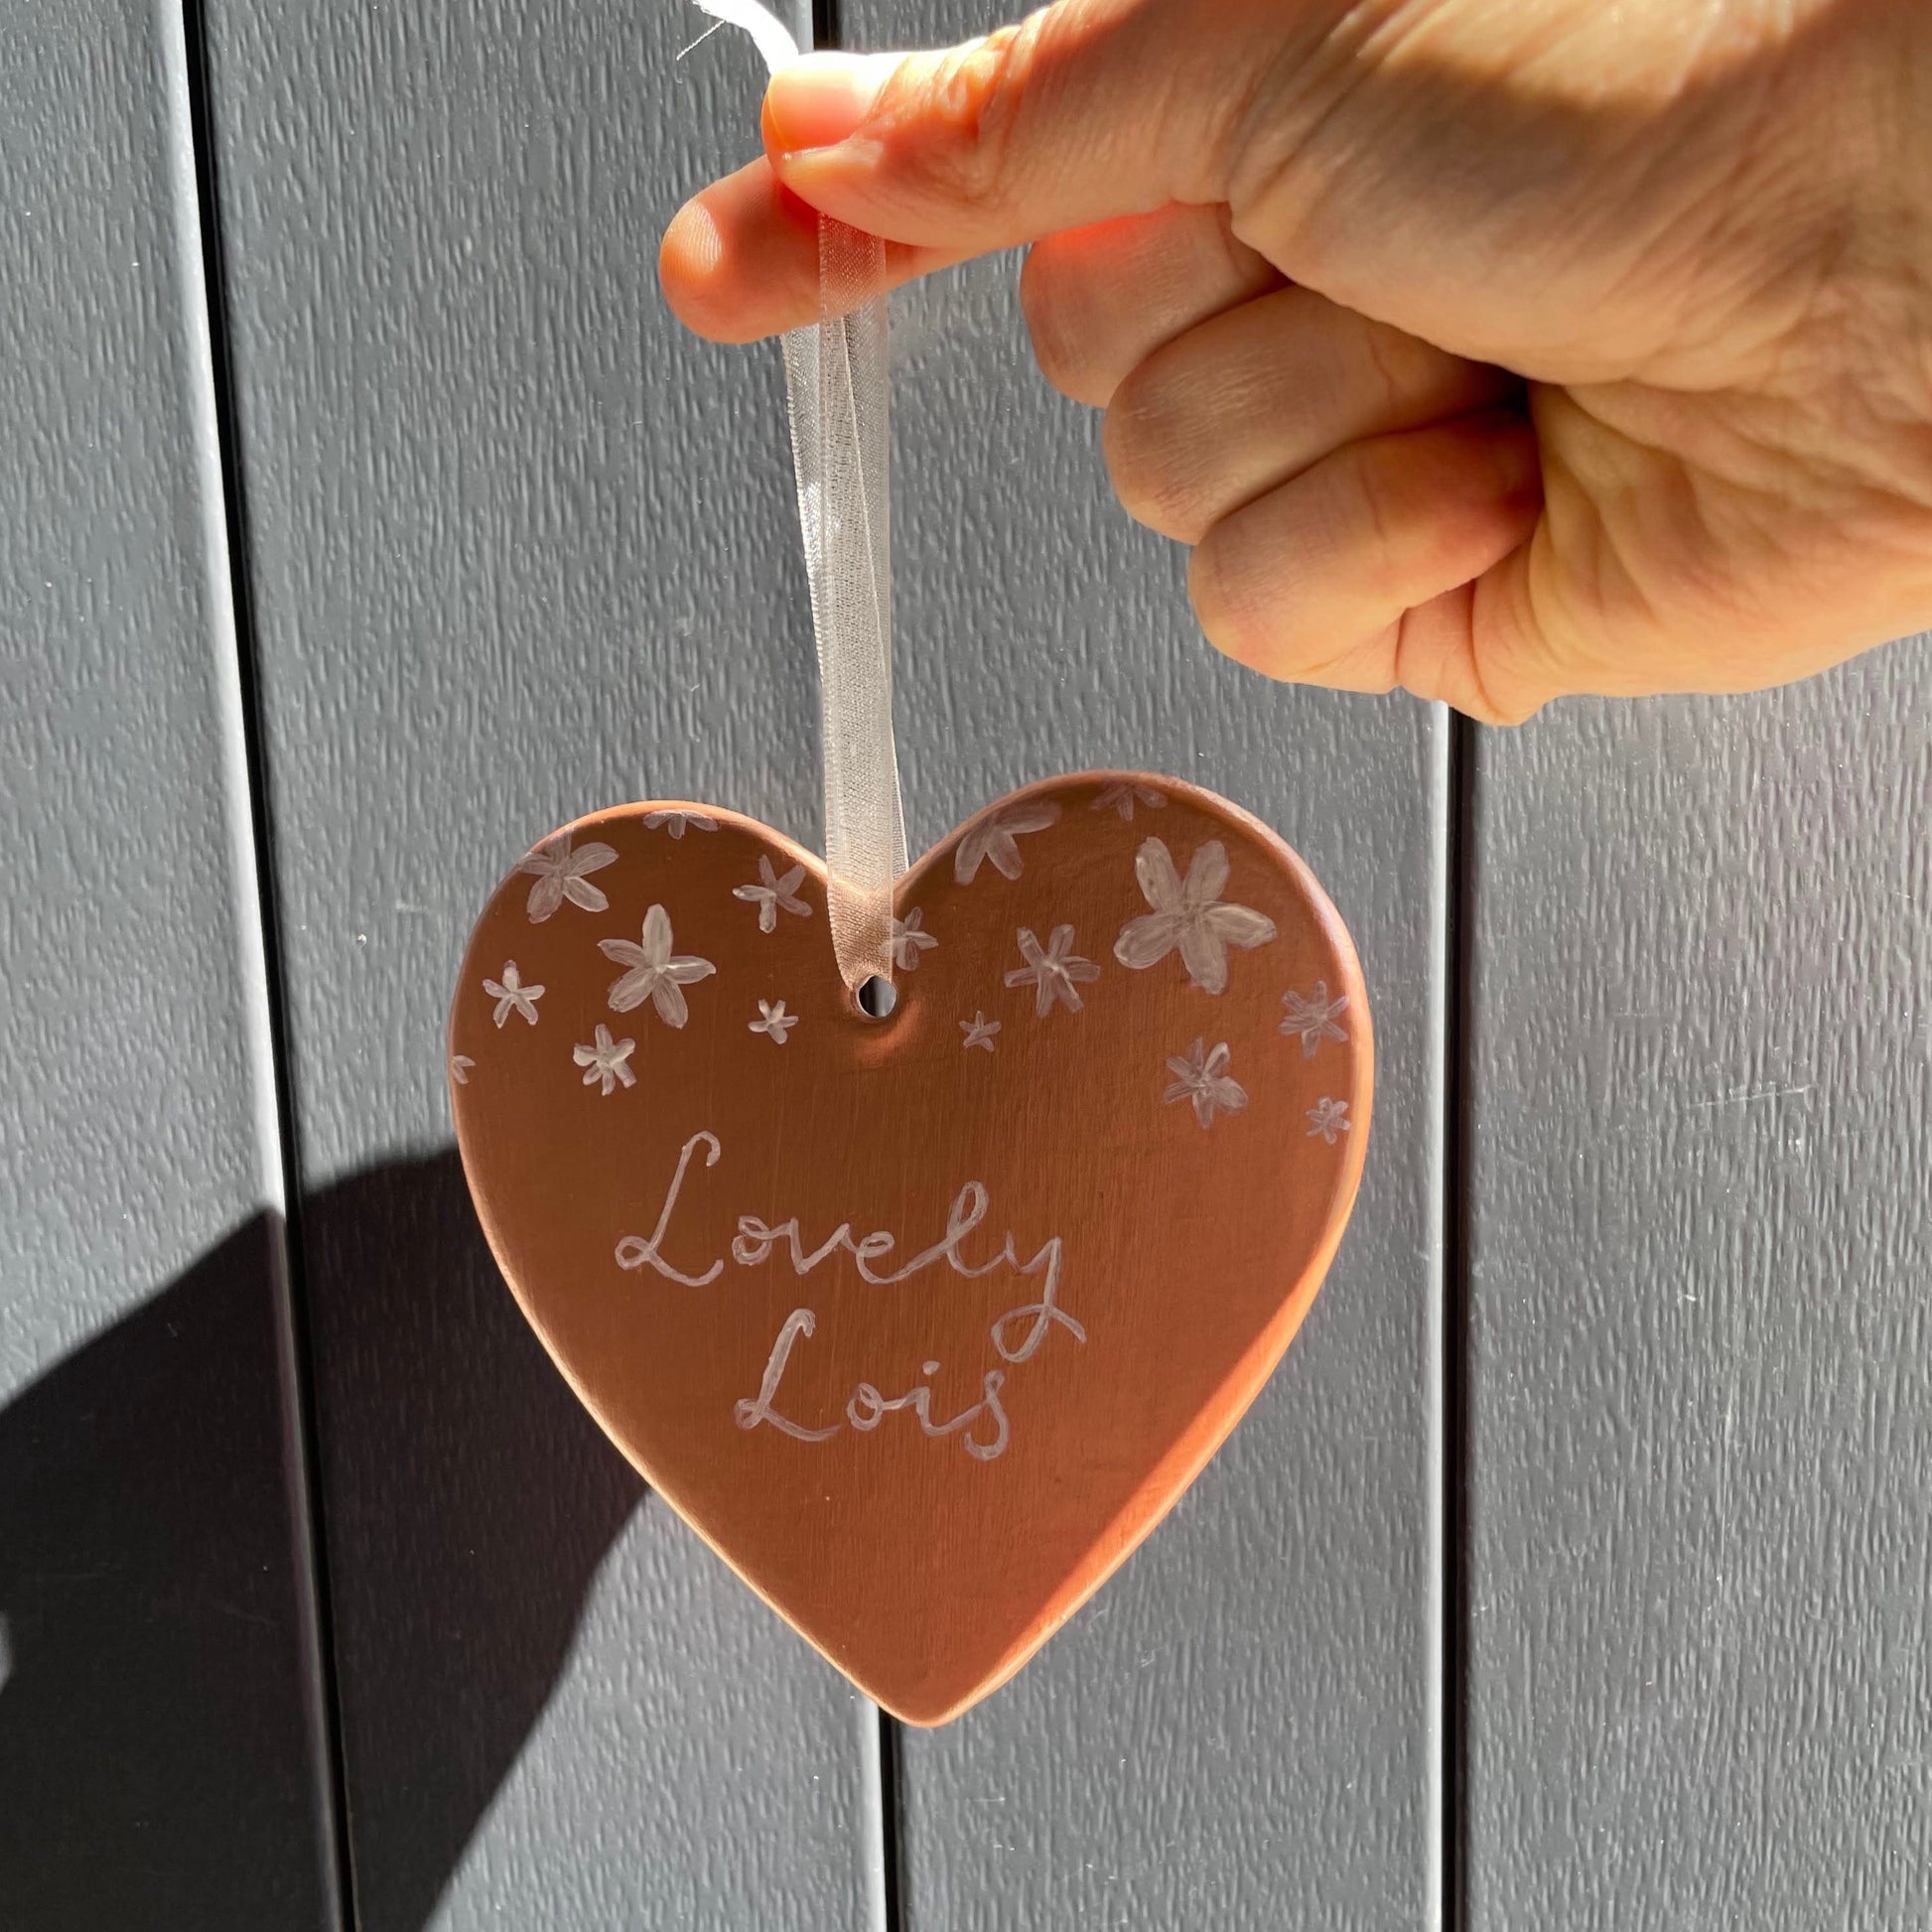 Personalised rose gold ceramic heart decoration Baubles And Hope Designs   